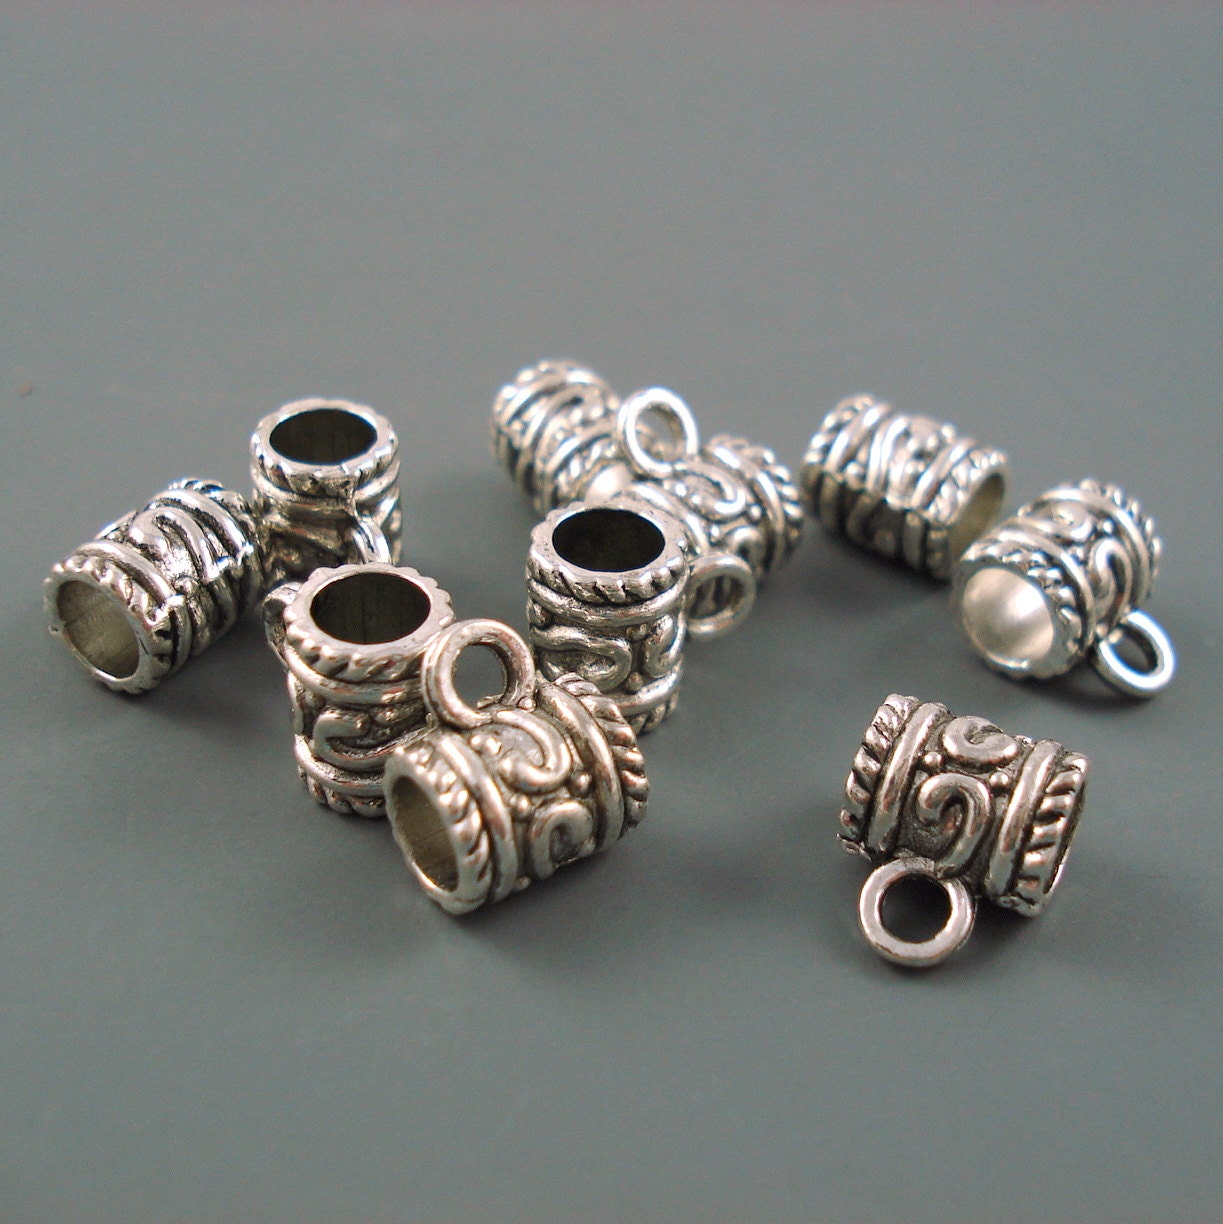 Scroll Etched Bead 4mm Bead Charm Holder Bead for Leather or Cord TEN Pieces TB-2